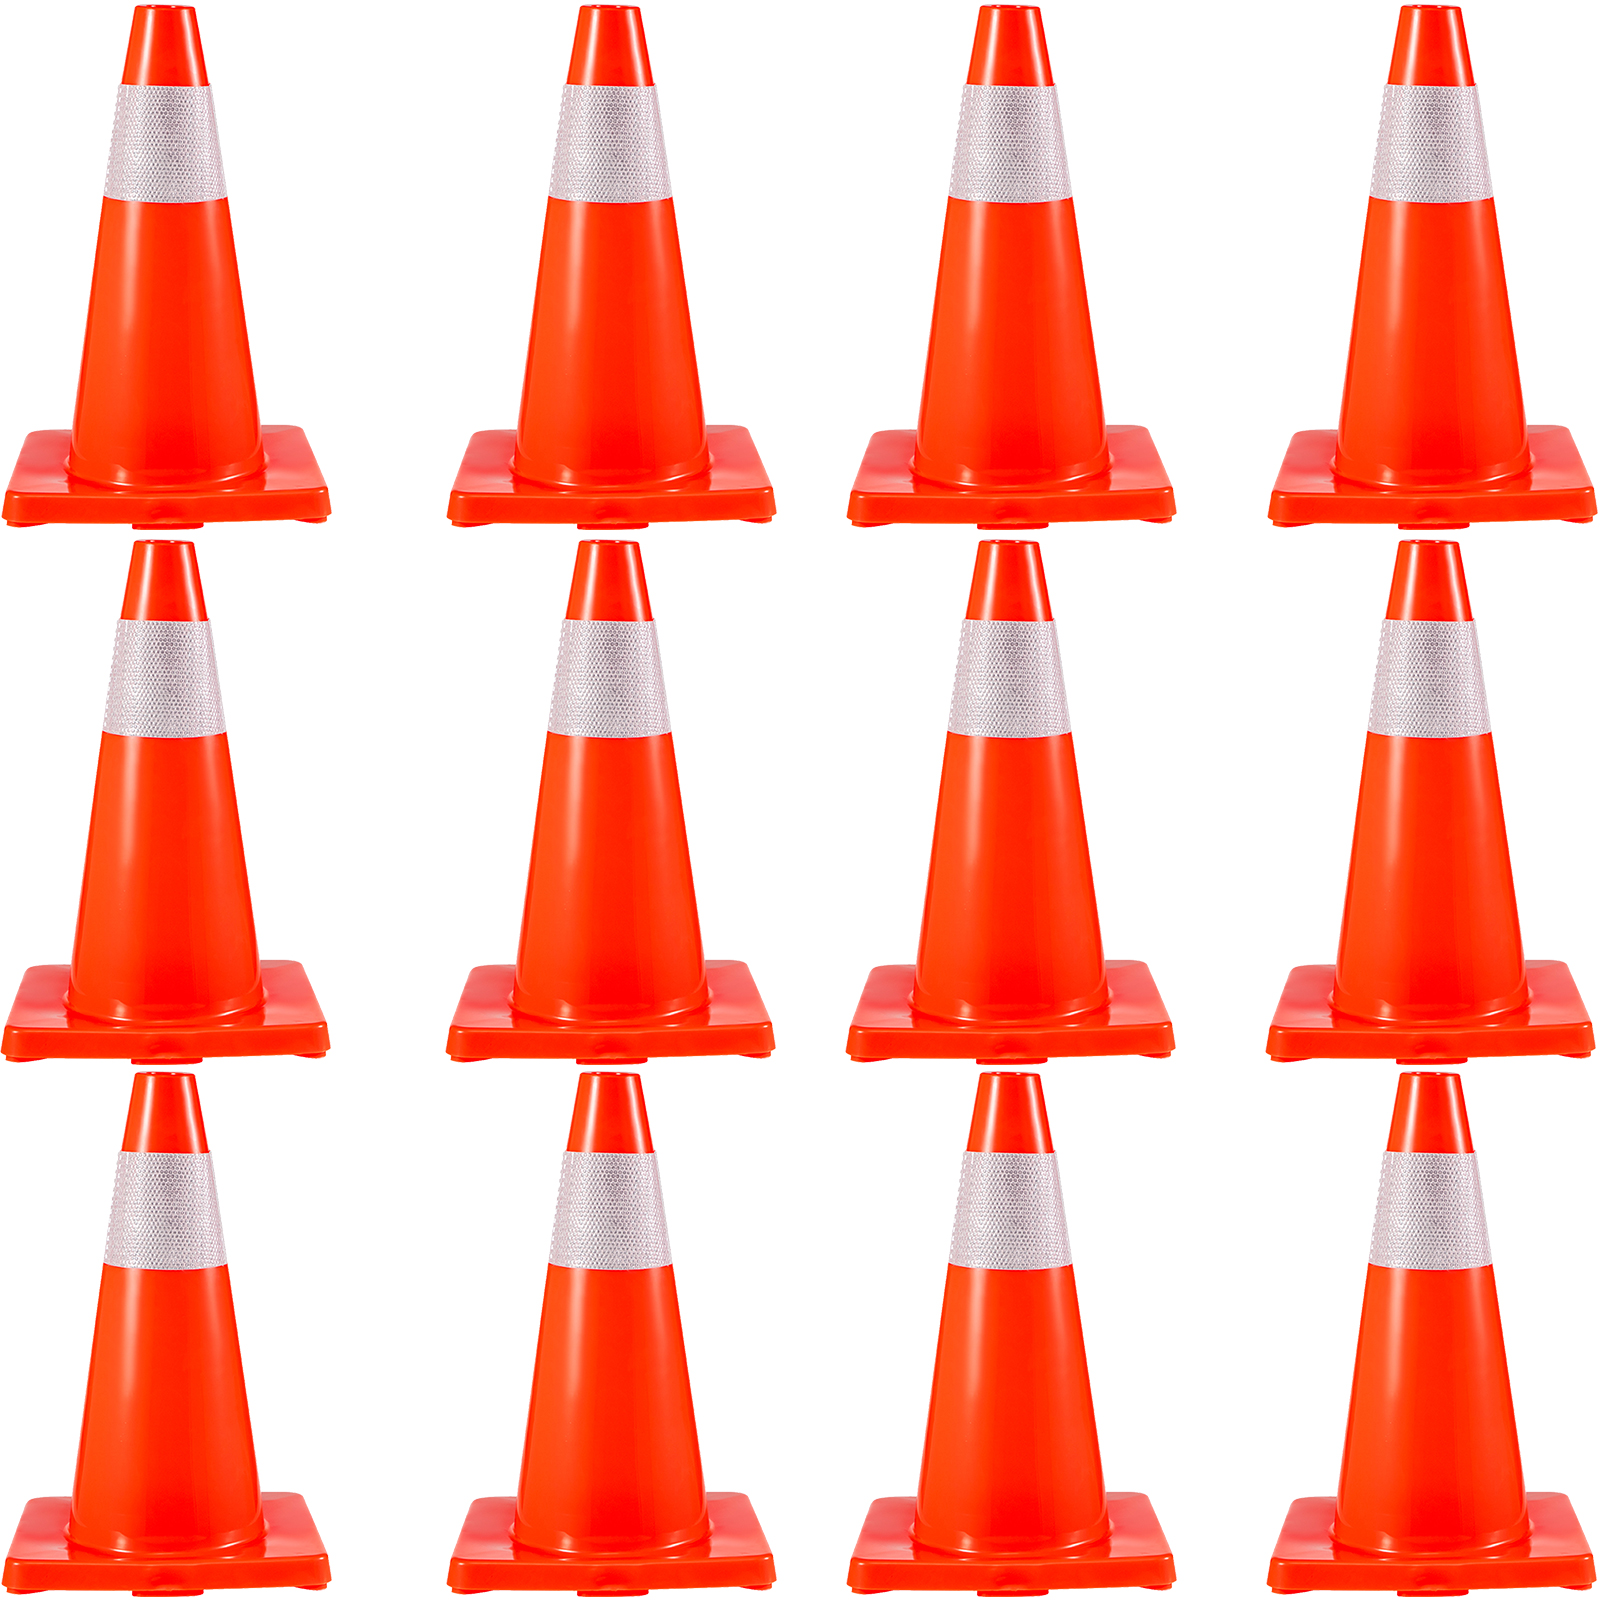 Traffic Safety Cones 12 PCS PVC Parking Cones 18" W/ 1 Reflective Collars 11" X 11" Red PVC Base For Higher Warning Roads Construction Sites от Vevor Many GEOs